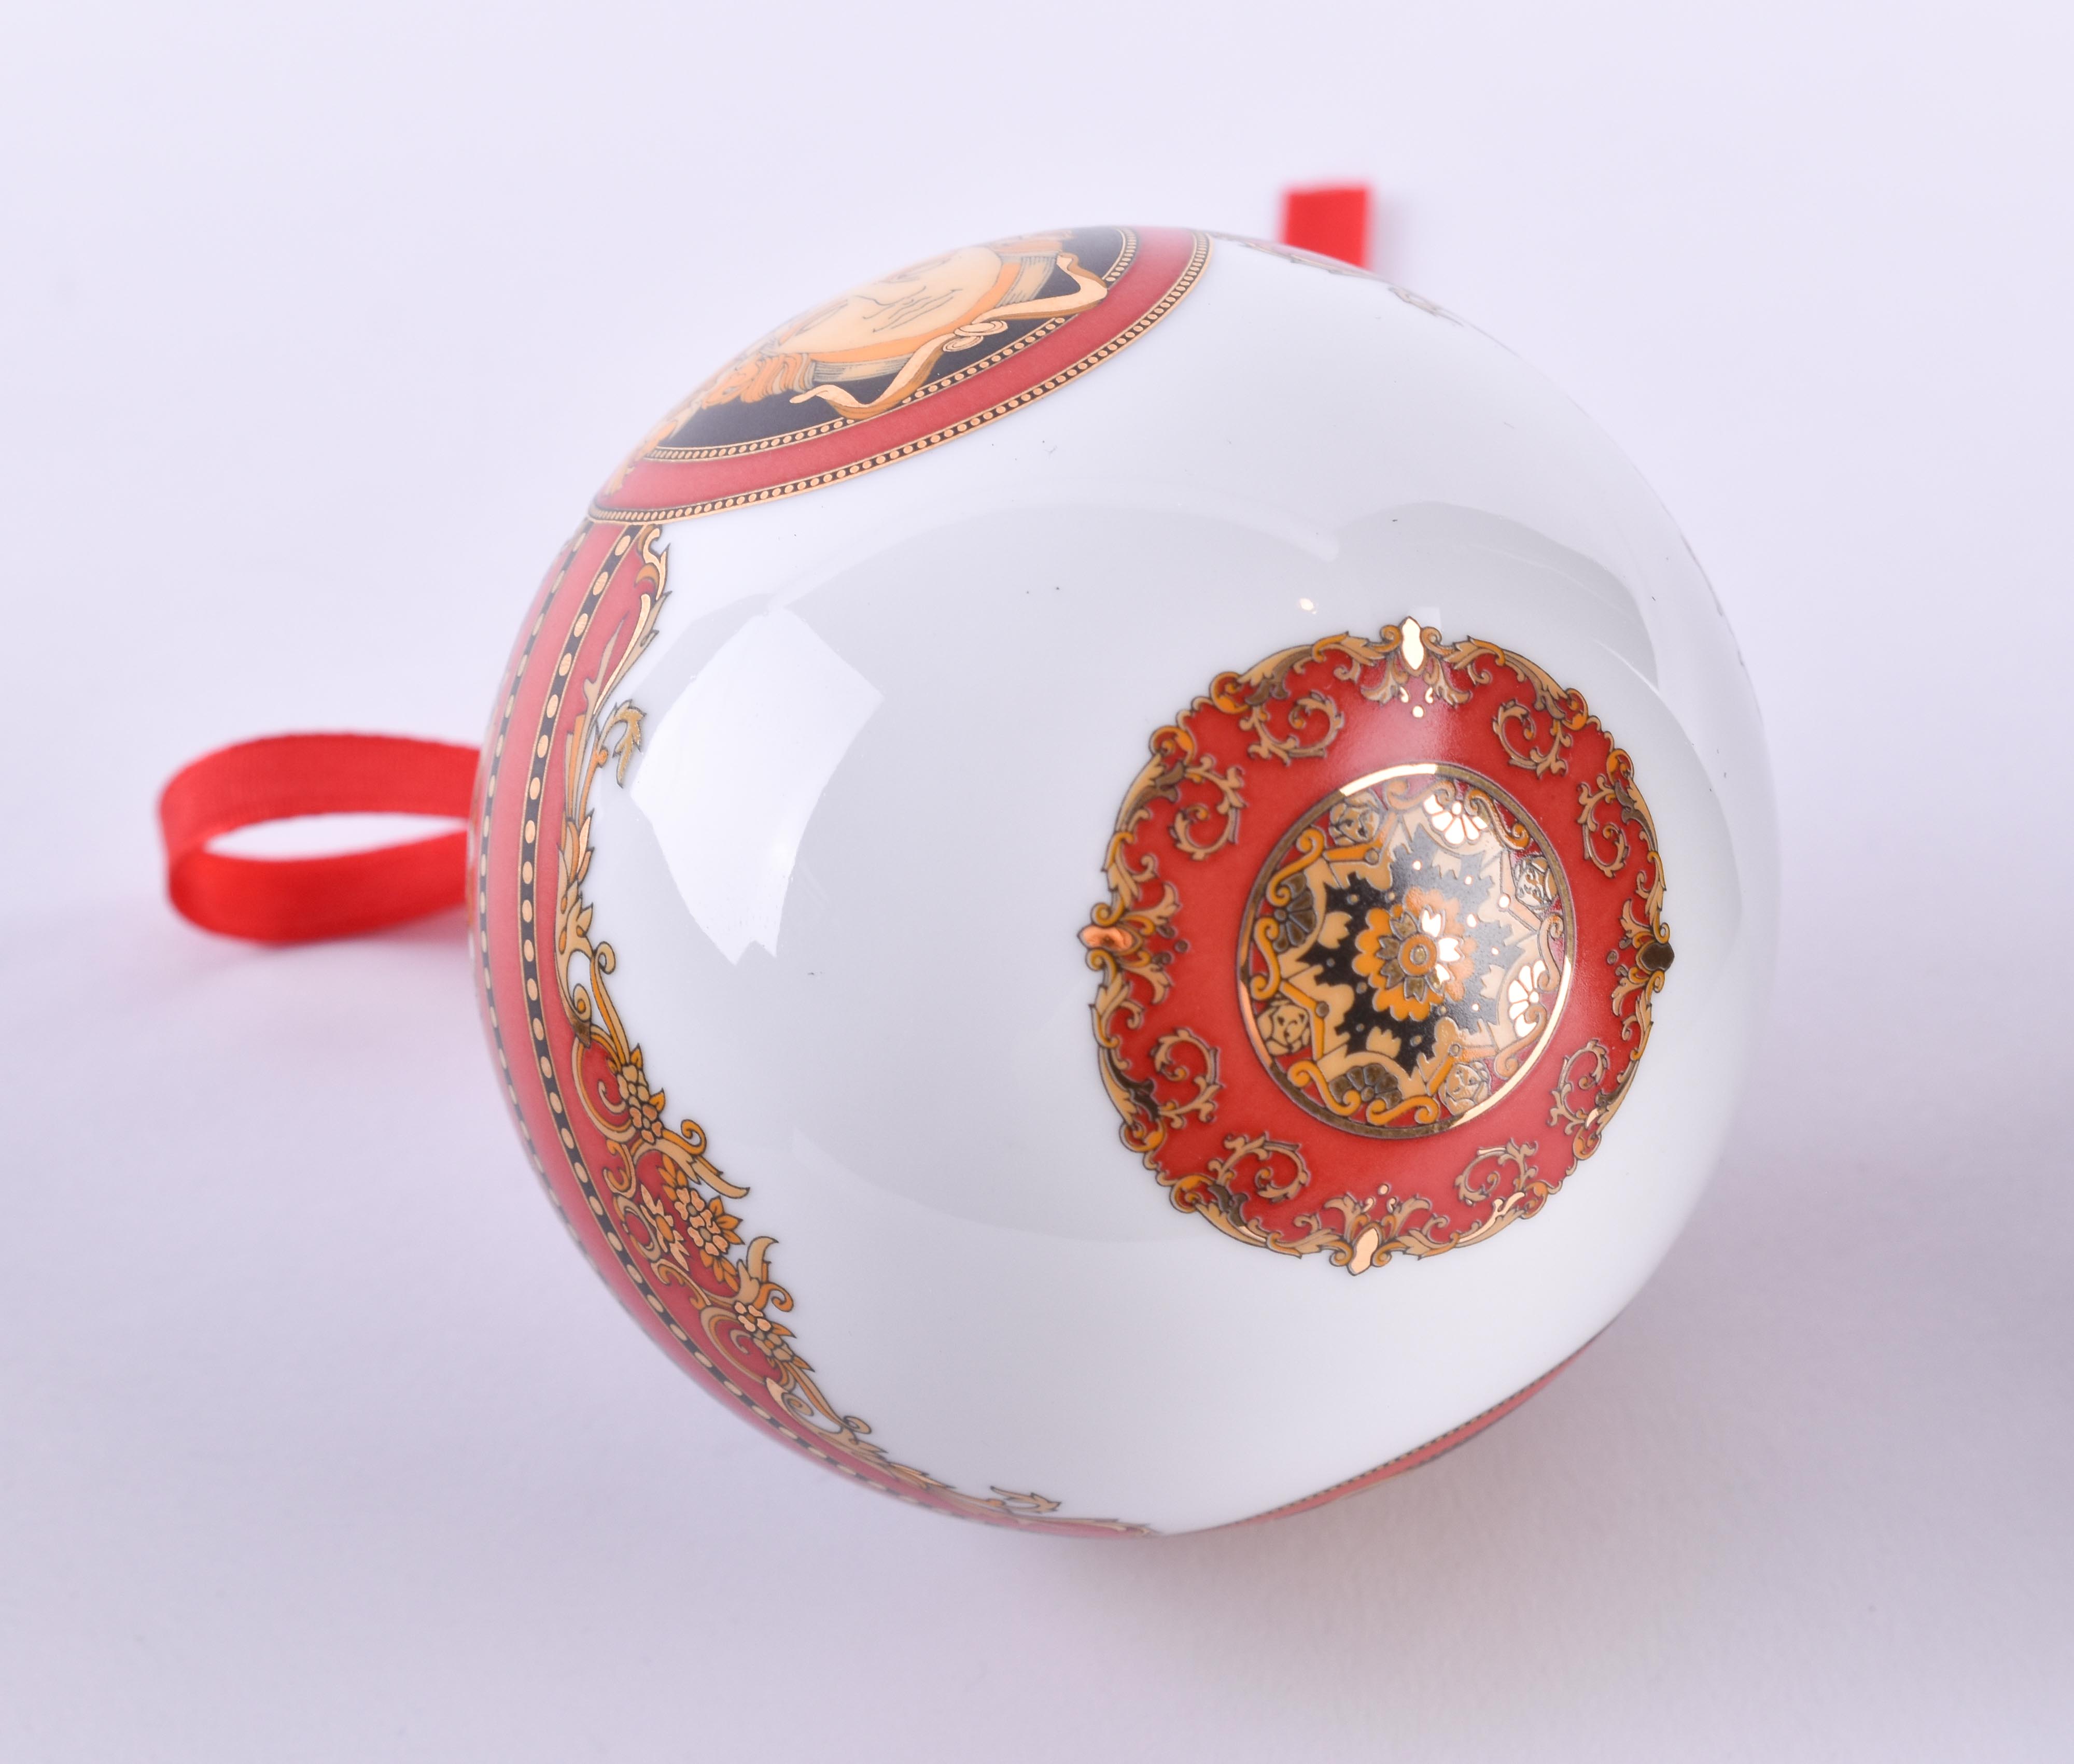 Rosenthal Versace Christmas bauble  - Image 2 of 4